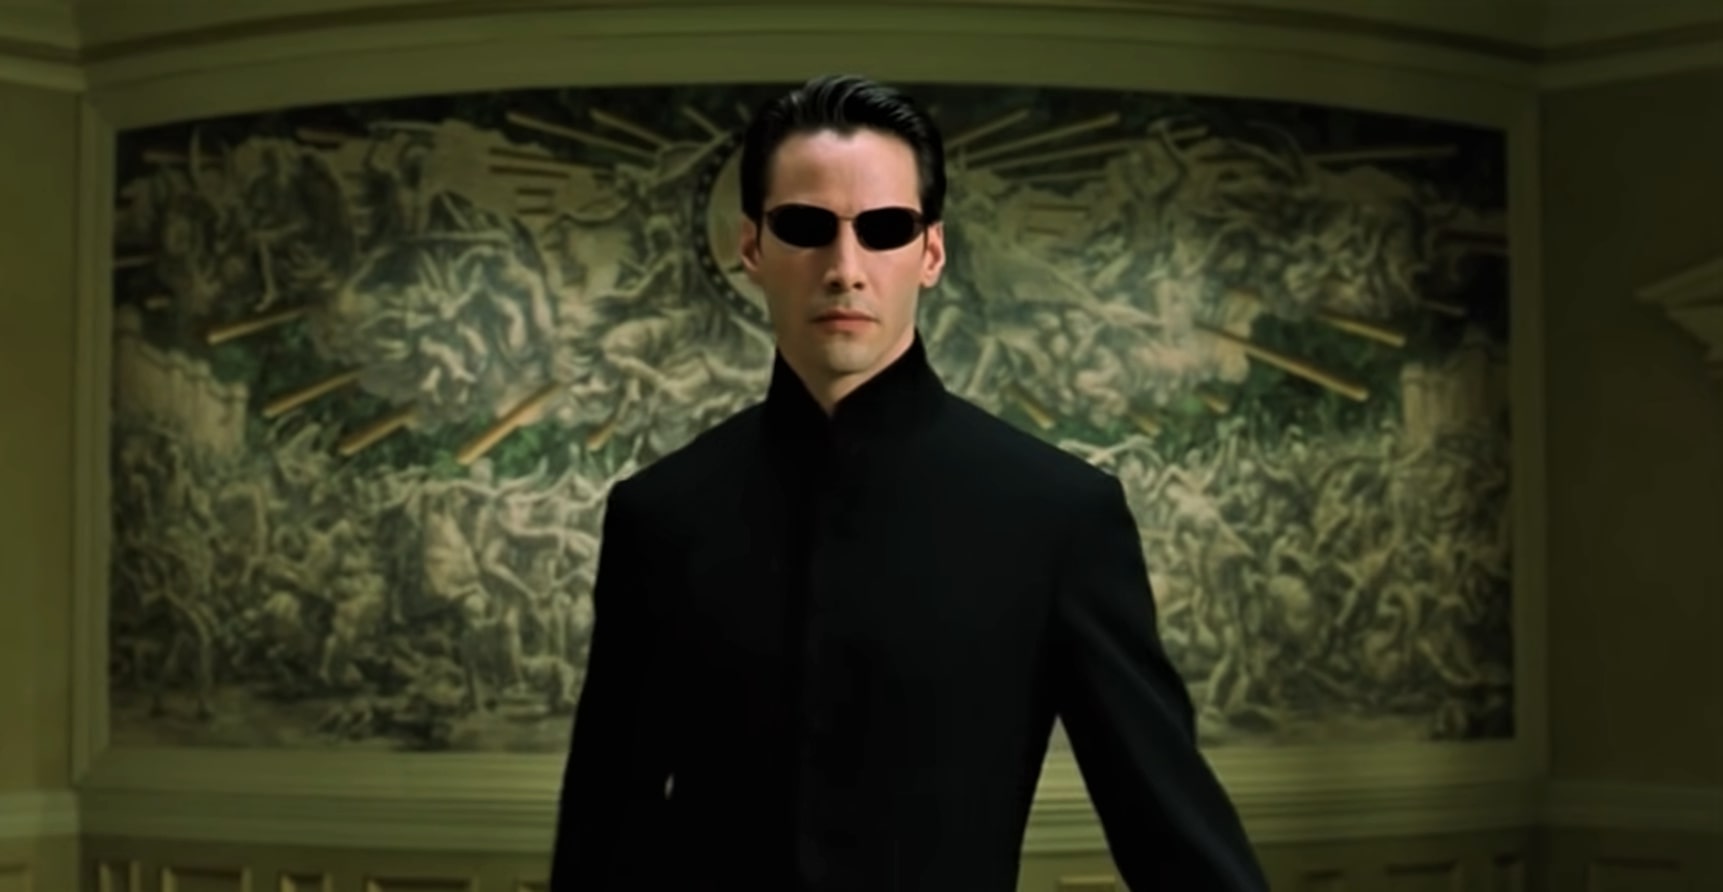 Is The Matrix Reloaded on Netflix, HBO Max, Hulu, or Prime?